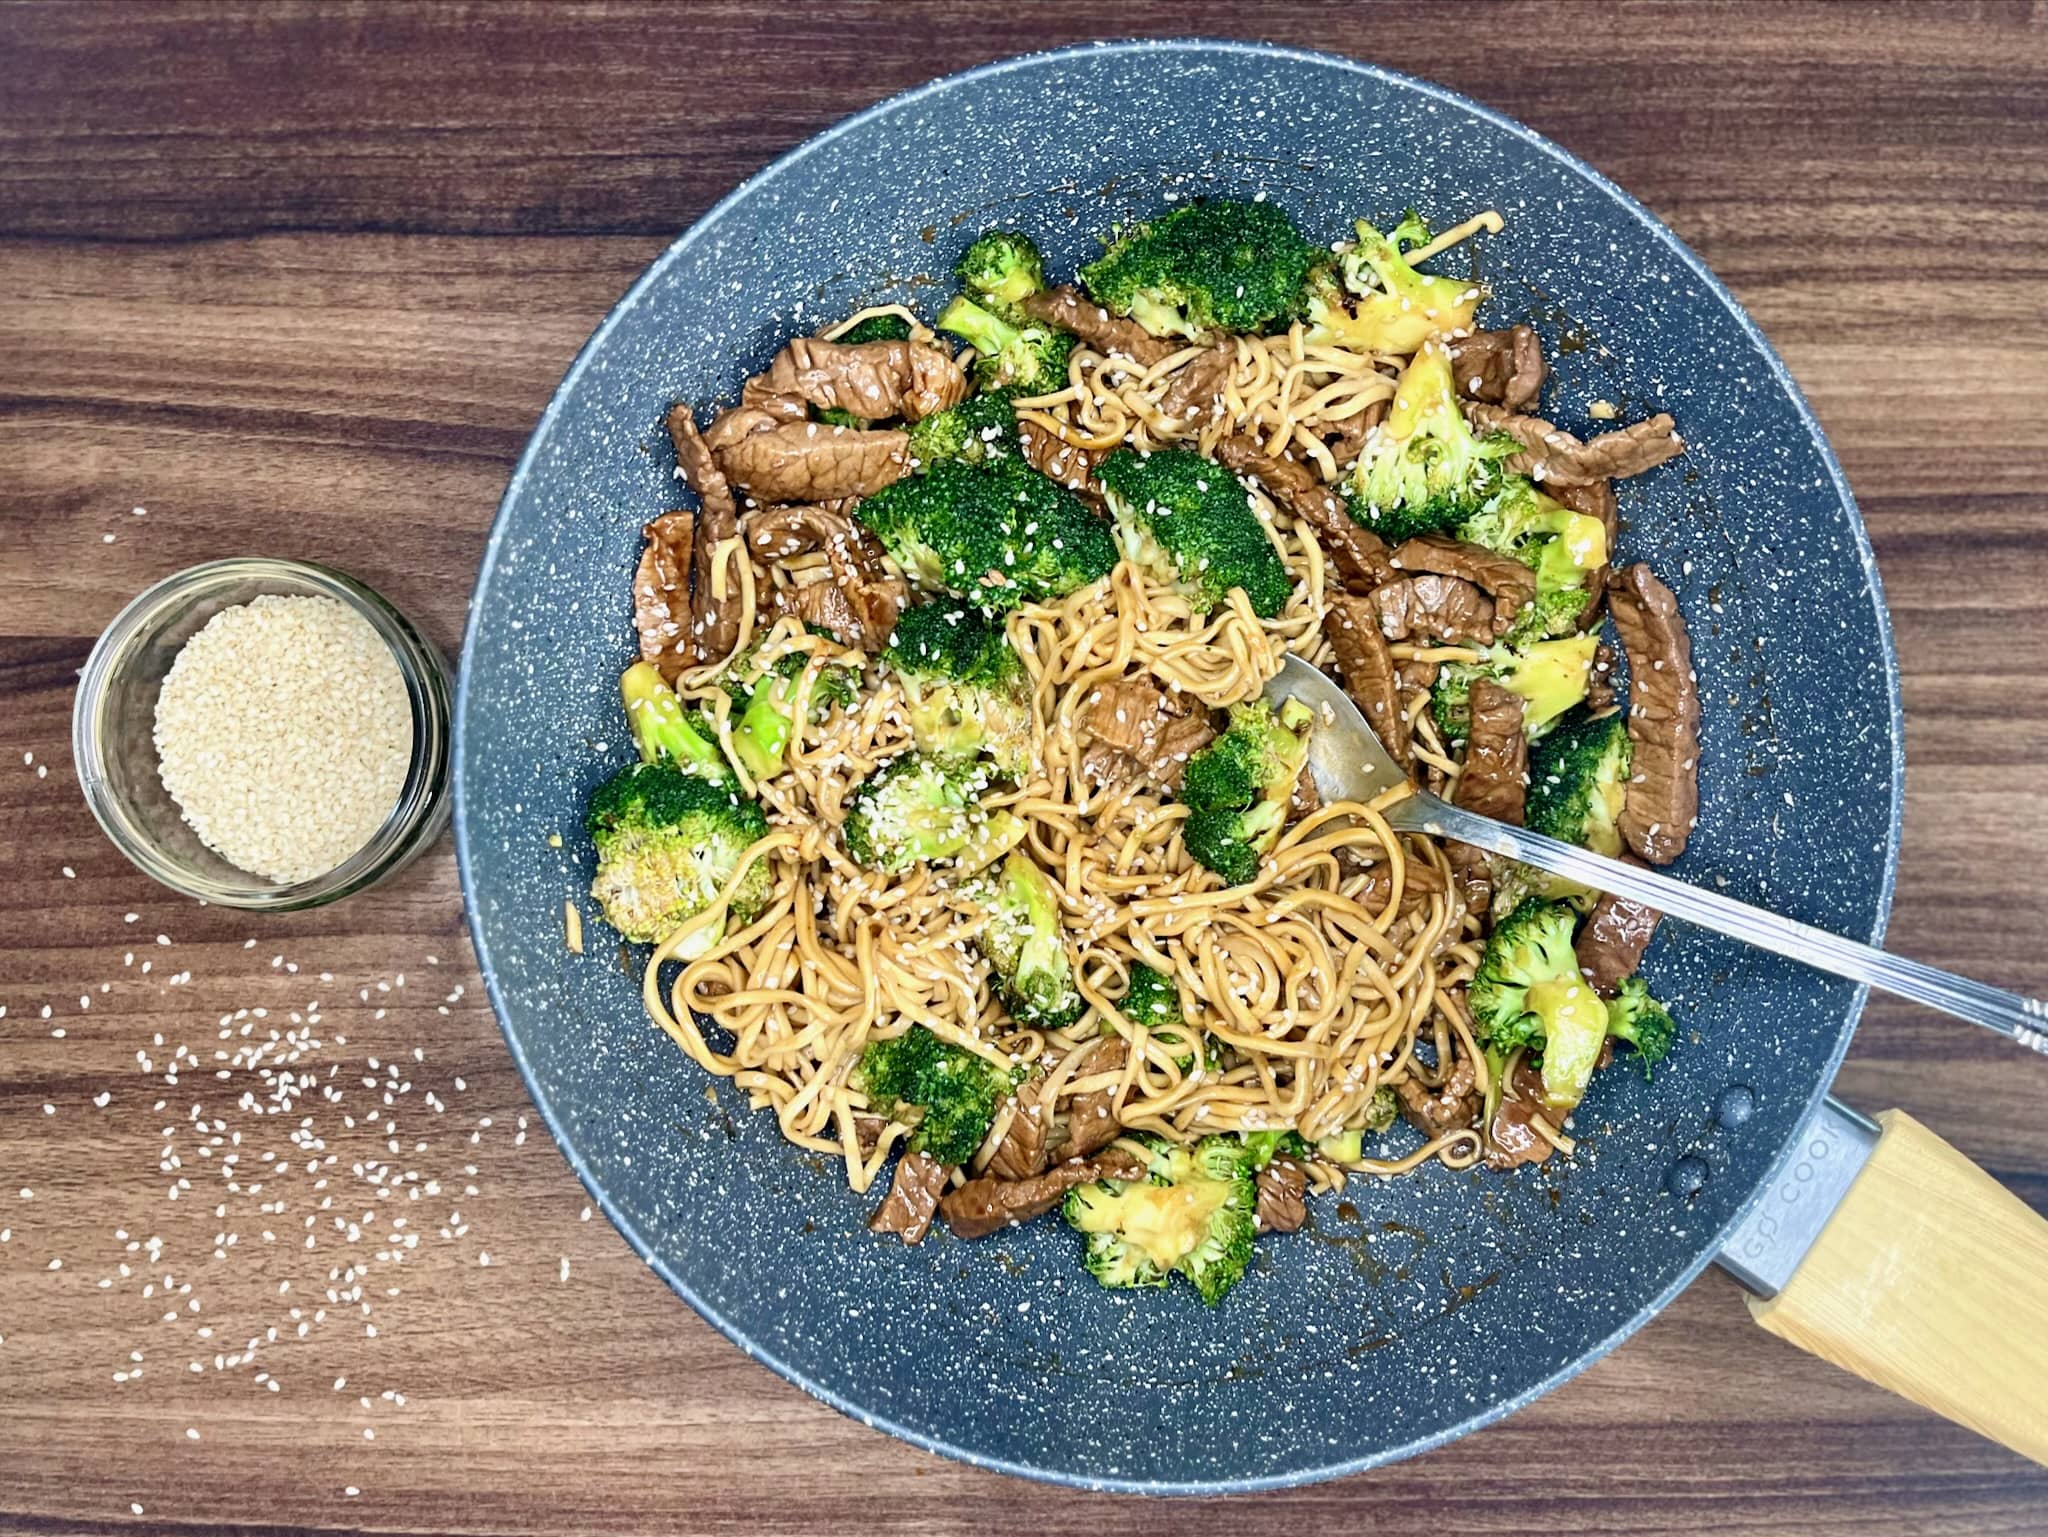 Beef and broccoli with egg noodles in a pan, sprinkled with sesame seeds